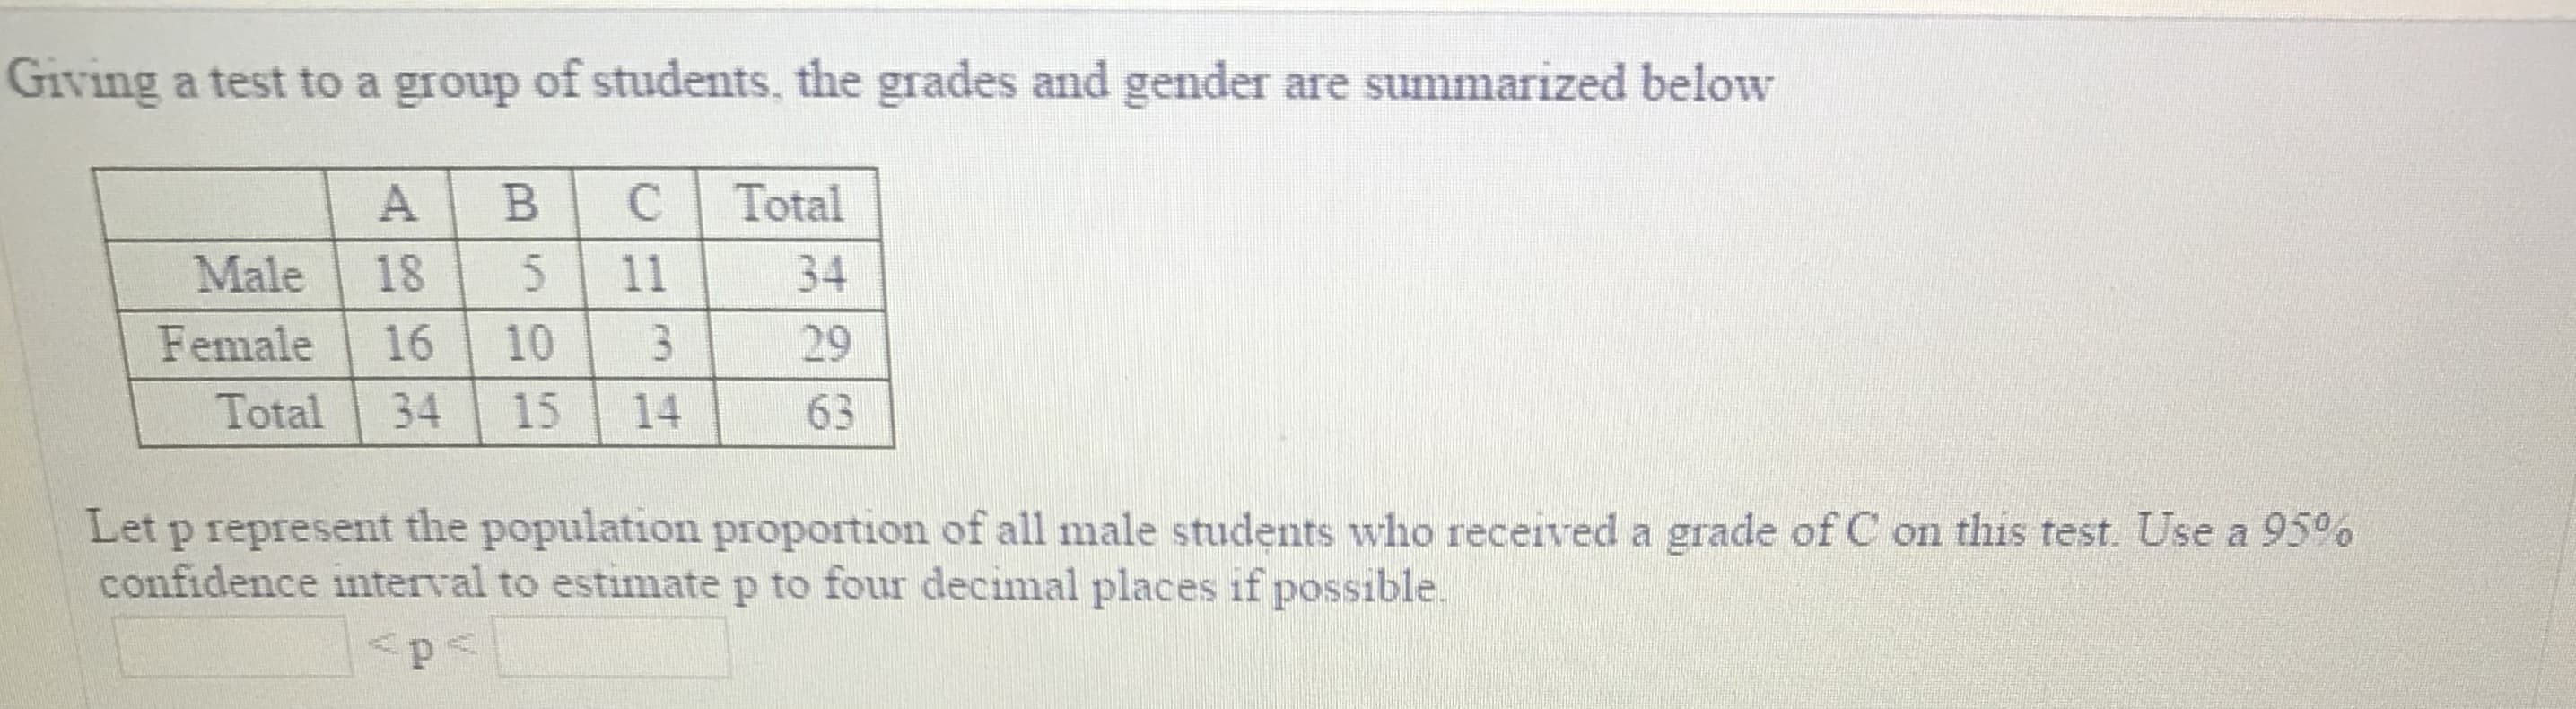 Giving a test to a group of students, the grades and gender are summarized below
A BC Total
Male 185 11
Female 16 10 329
Total 34 15 14 63
Let p represent the population proportion of all male students who received a grade of C on this test. Use a 95%
confidence interval to estimate p to four decimal places if possible
